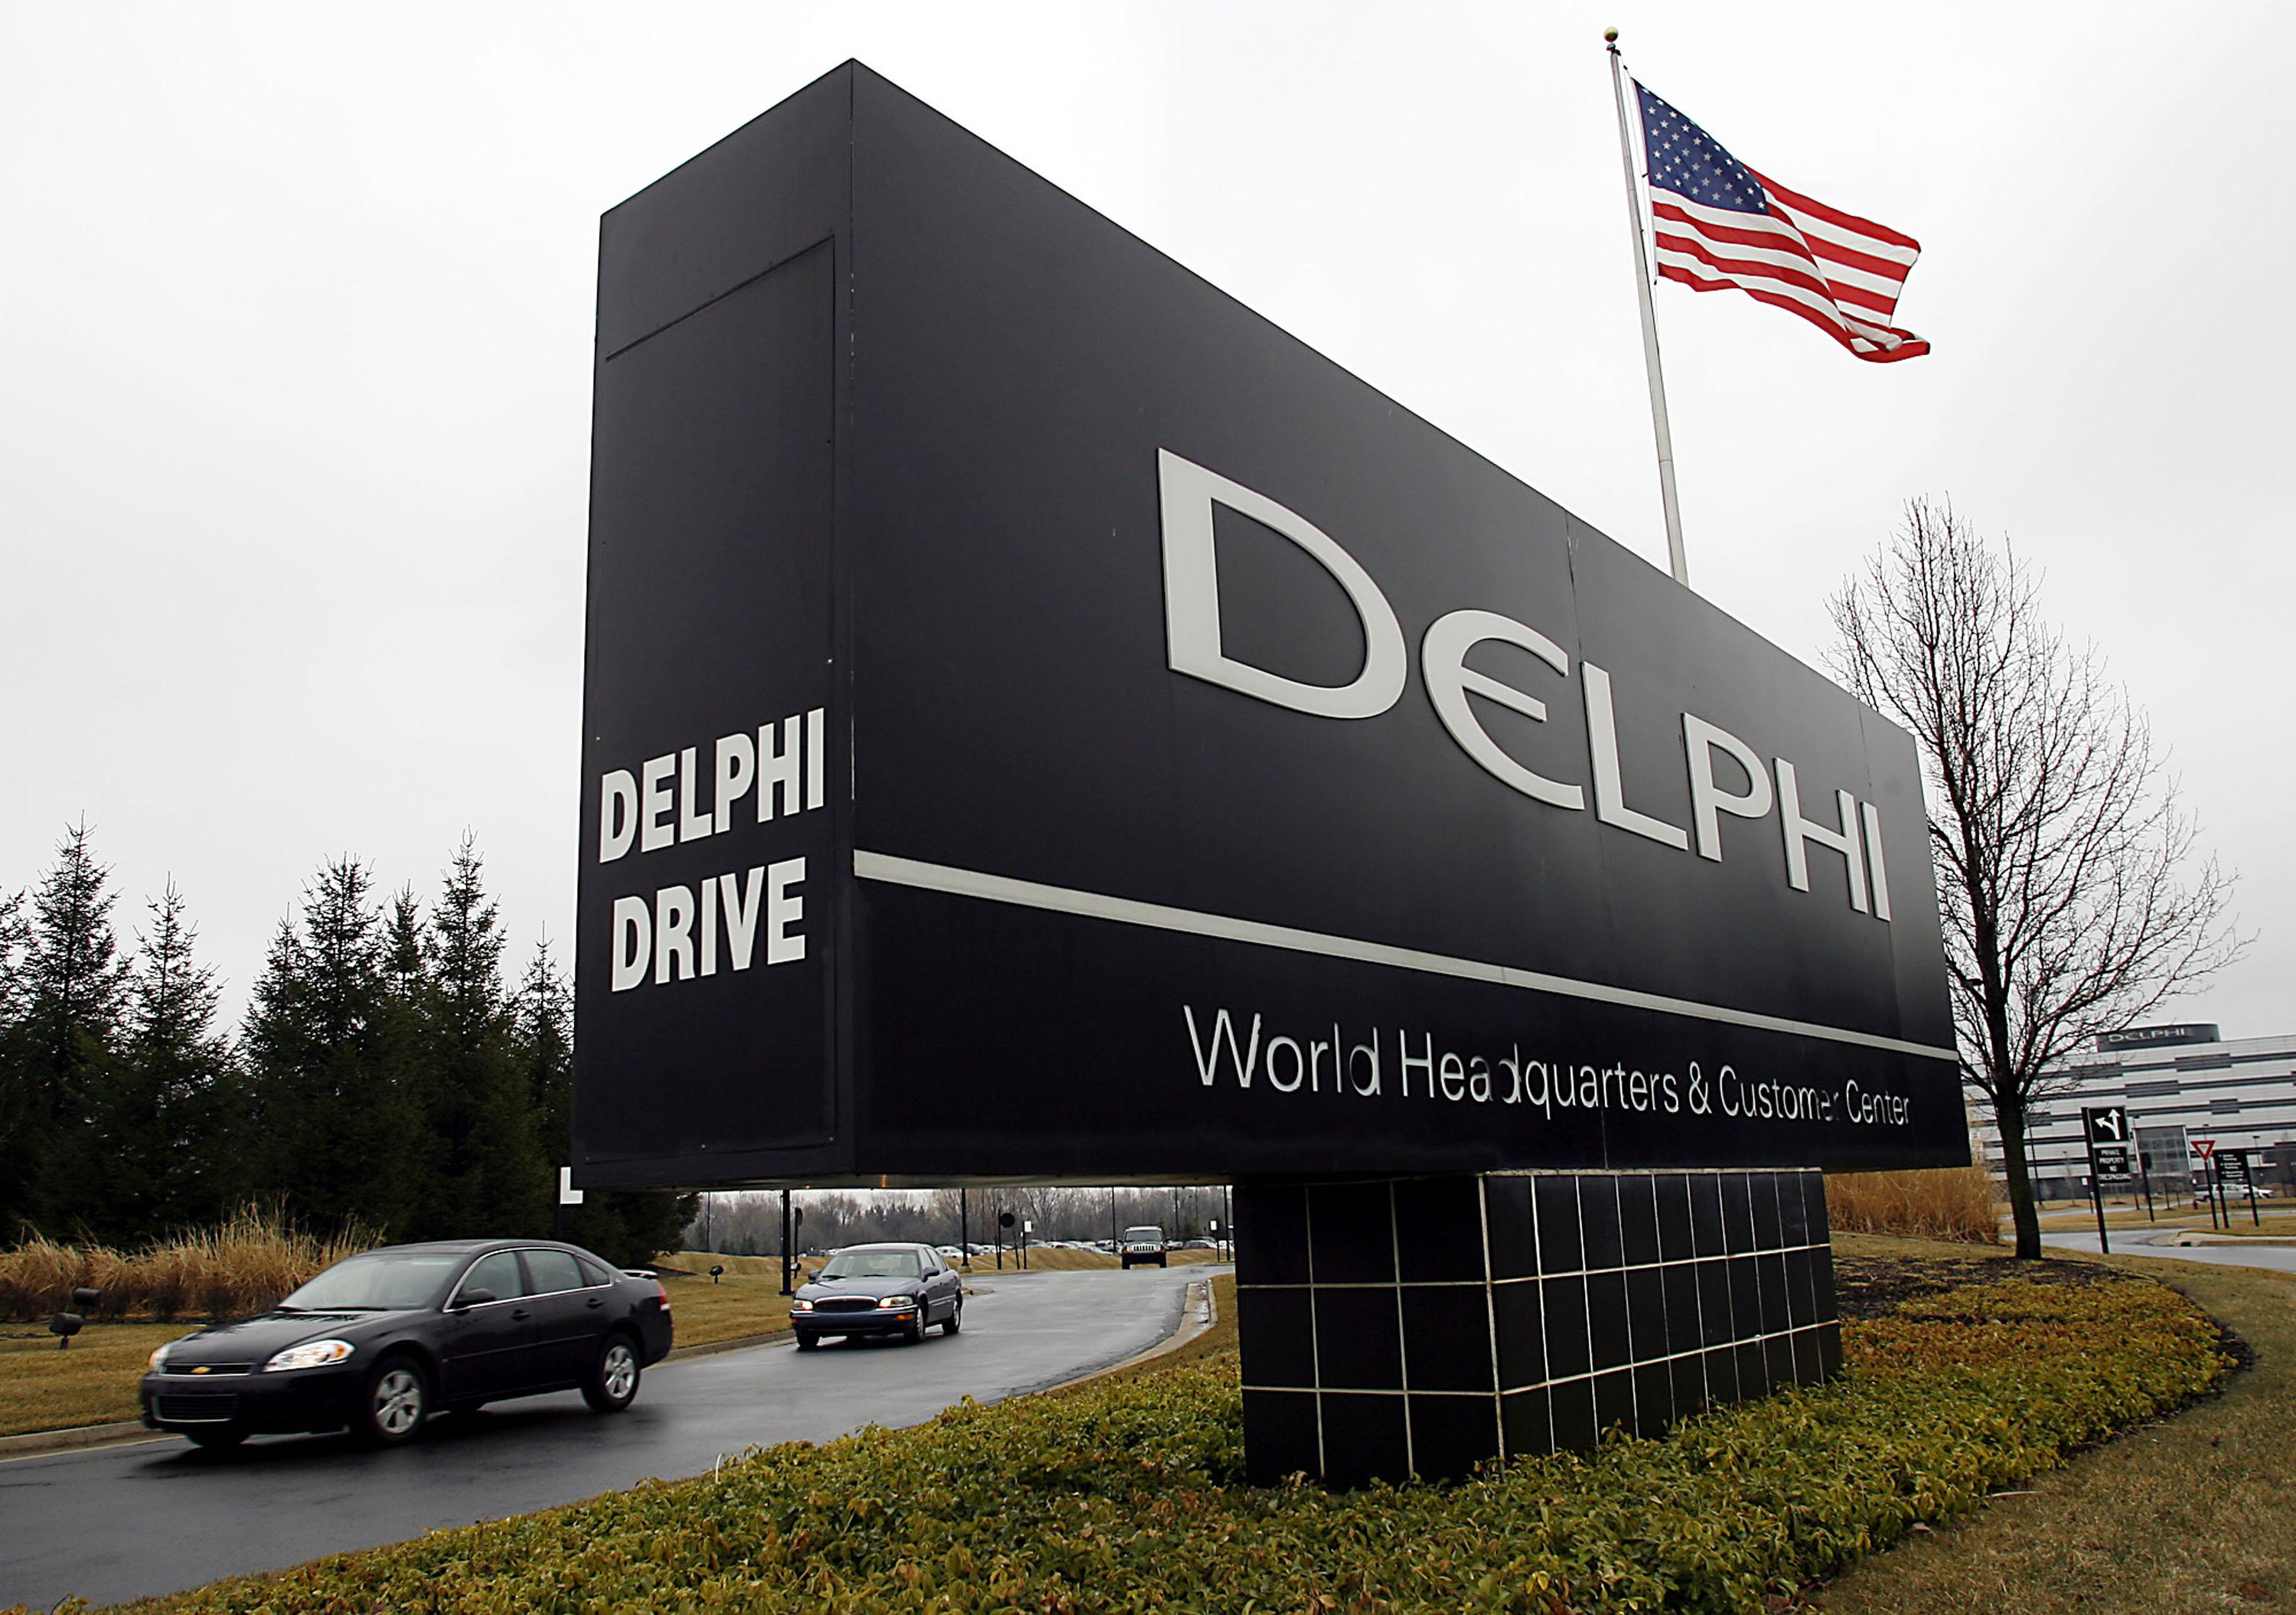 Still fighting: The Delphi workers Obama robbed